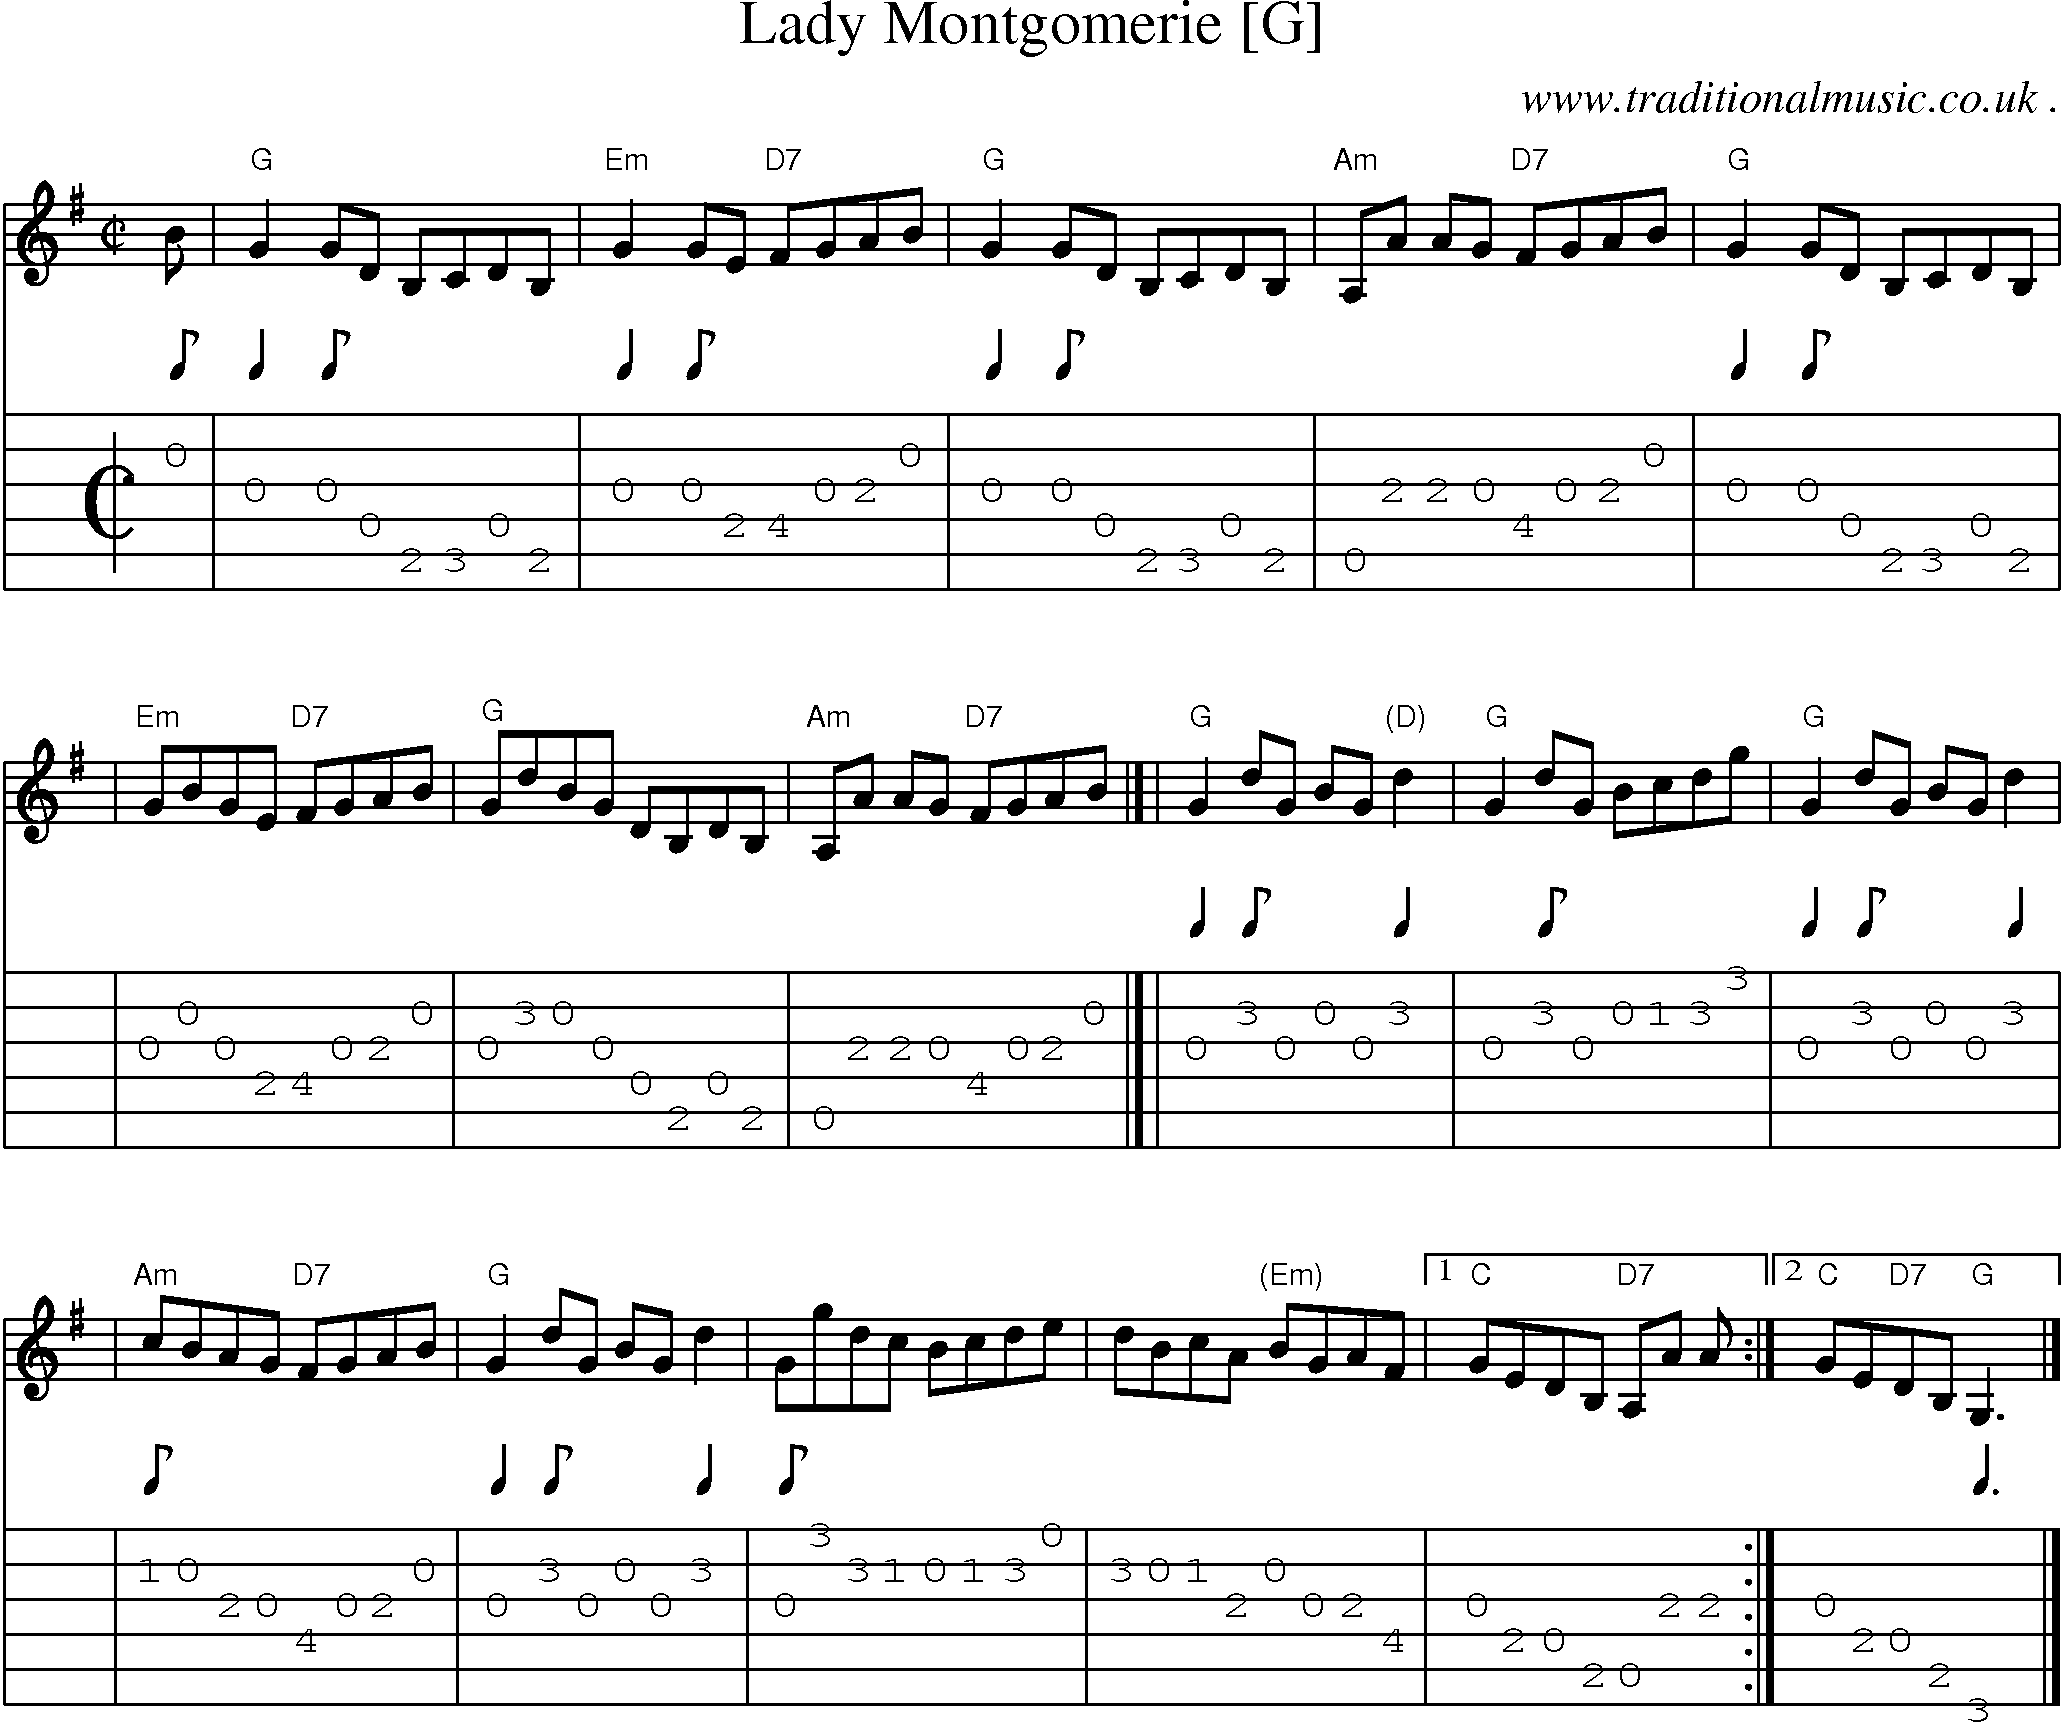 Sheet-music  score, Chords and Guitar Tabs for Lady Montgomerie [g]